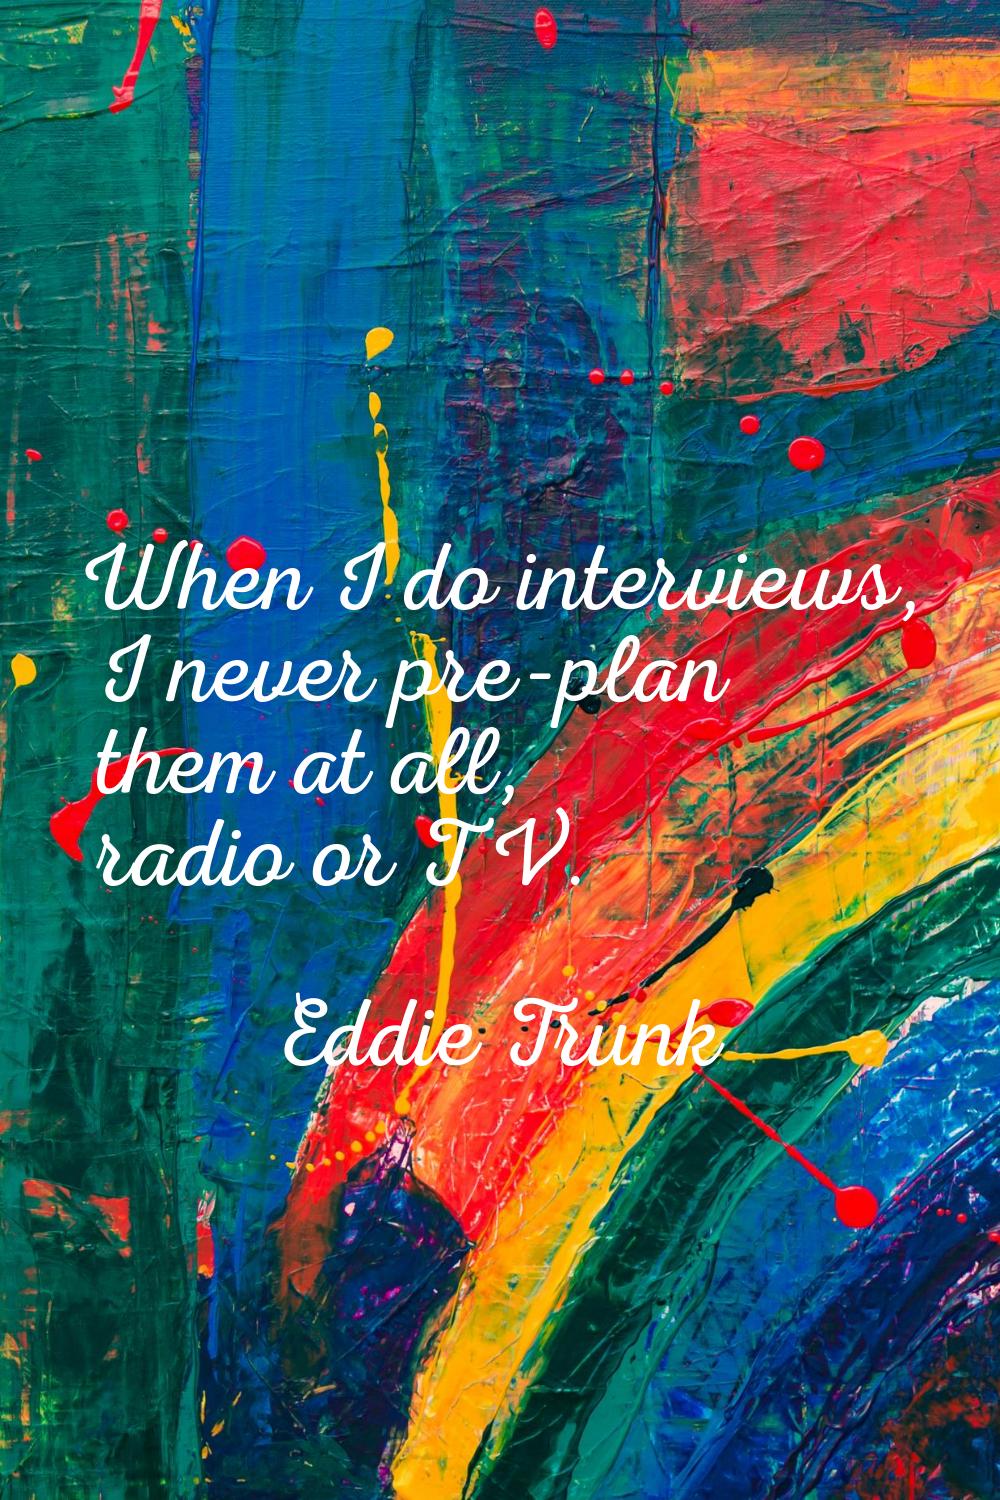 When I do interviews, I never pre-plan them at all, radio or TV.